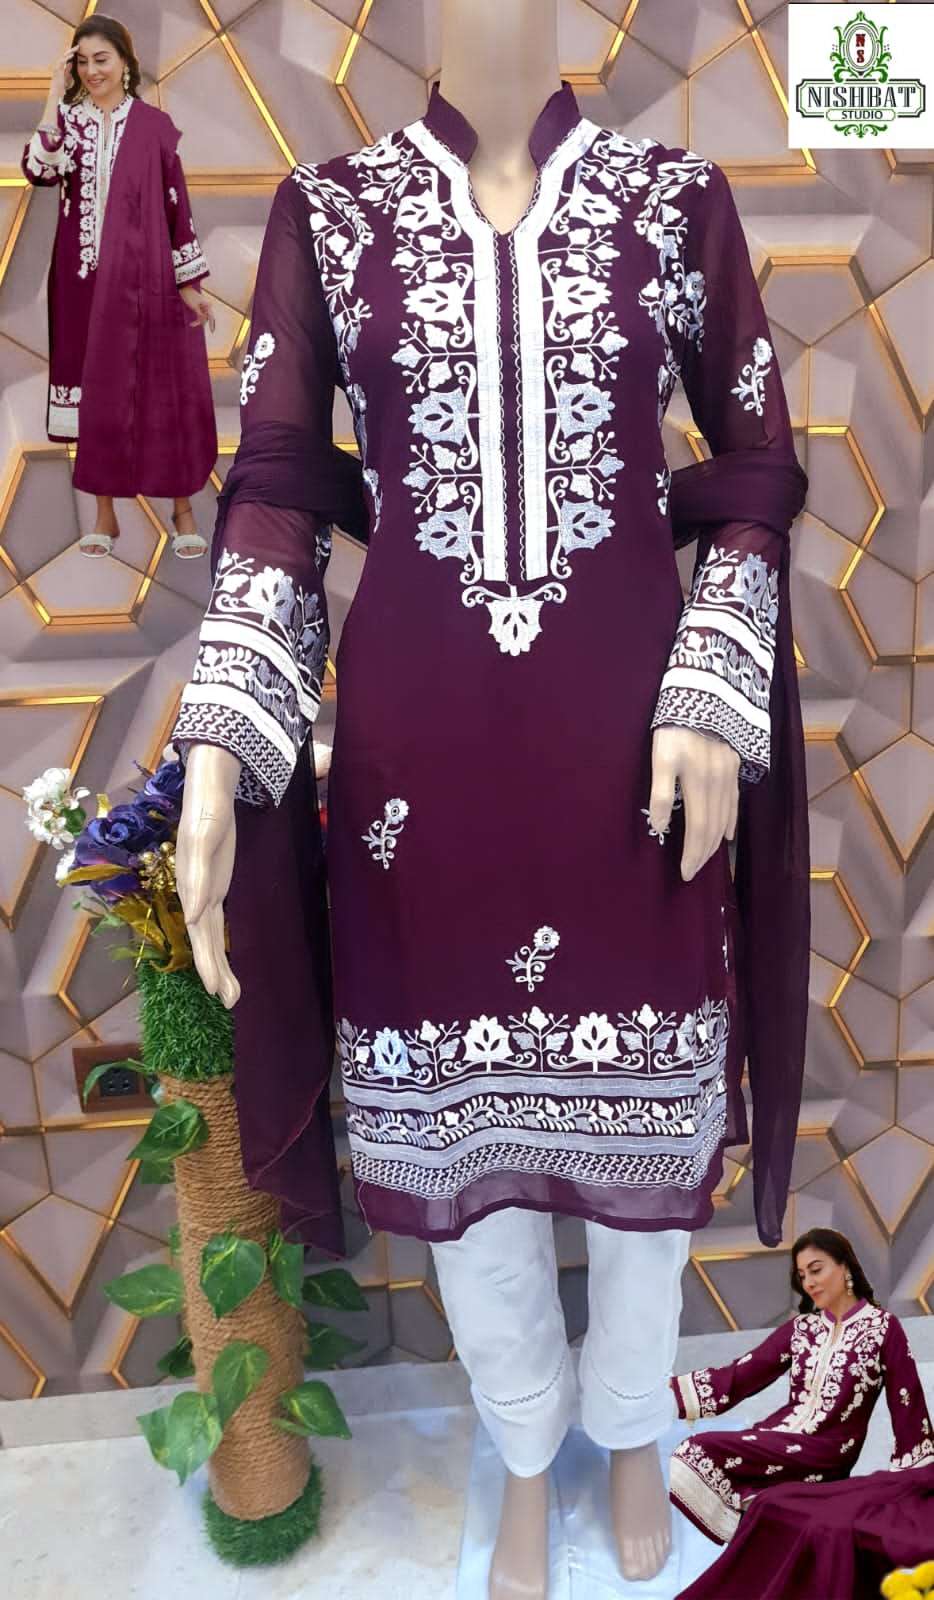 NISHBAT VOL-24 BY NISHBAT STUDIO 24-A TO 24-C SERIES DESIGNER PAKISTANI SUITS BEAUTIFUL STYLISH FANCY COLORFUL PARTY WEAR & OCCASIONAL WEAR FAUX GEORGETTE EMBROIDERED DRESSES AT WHOLESALE PRICE